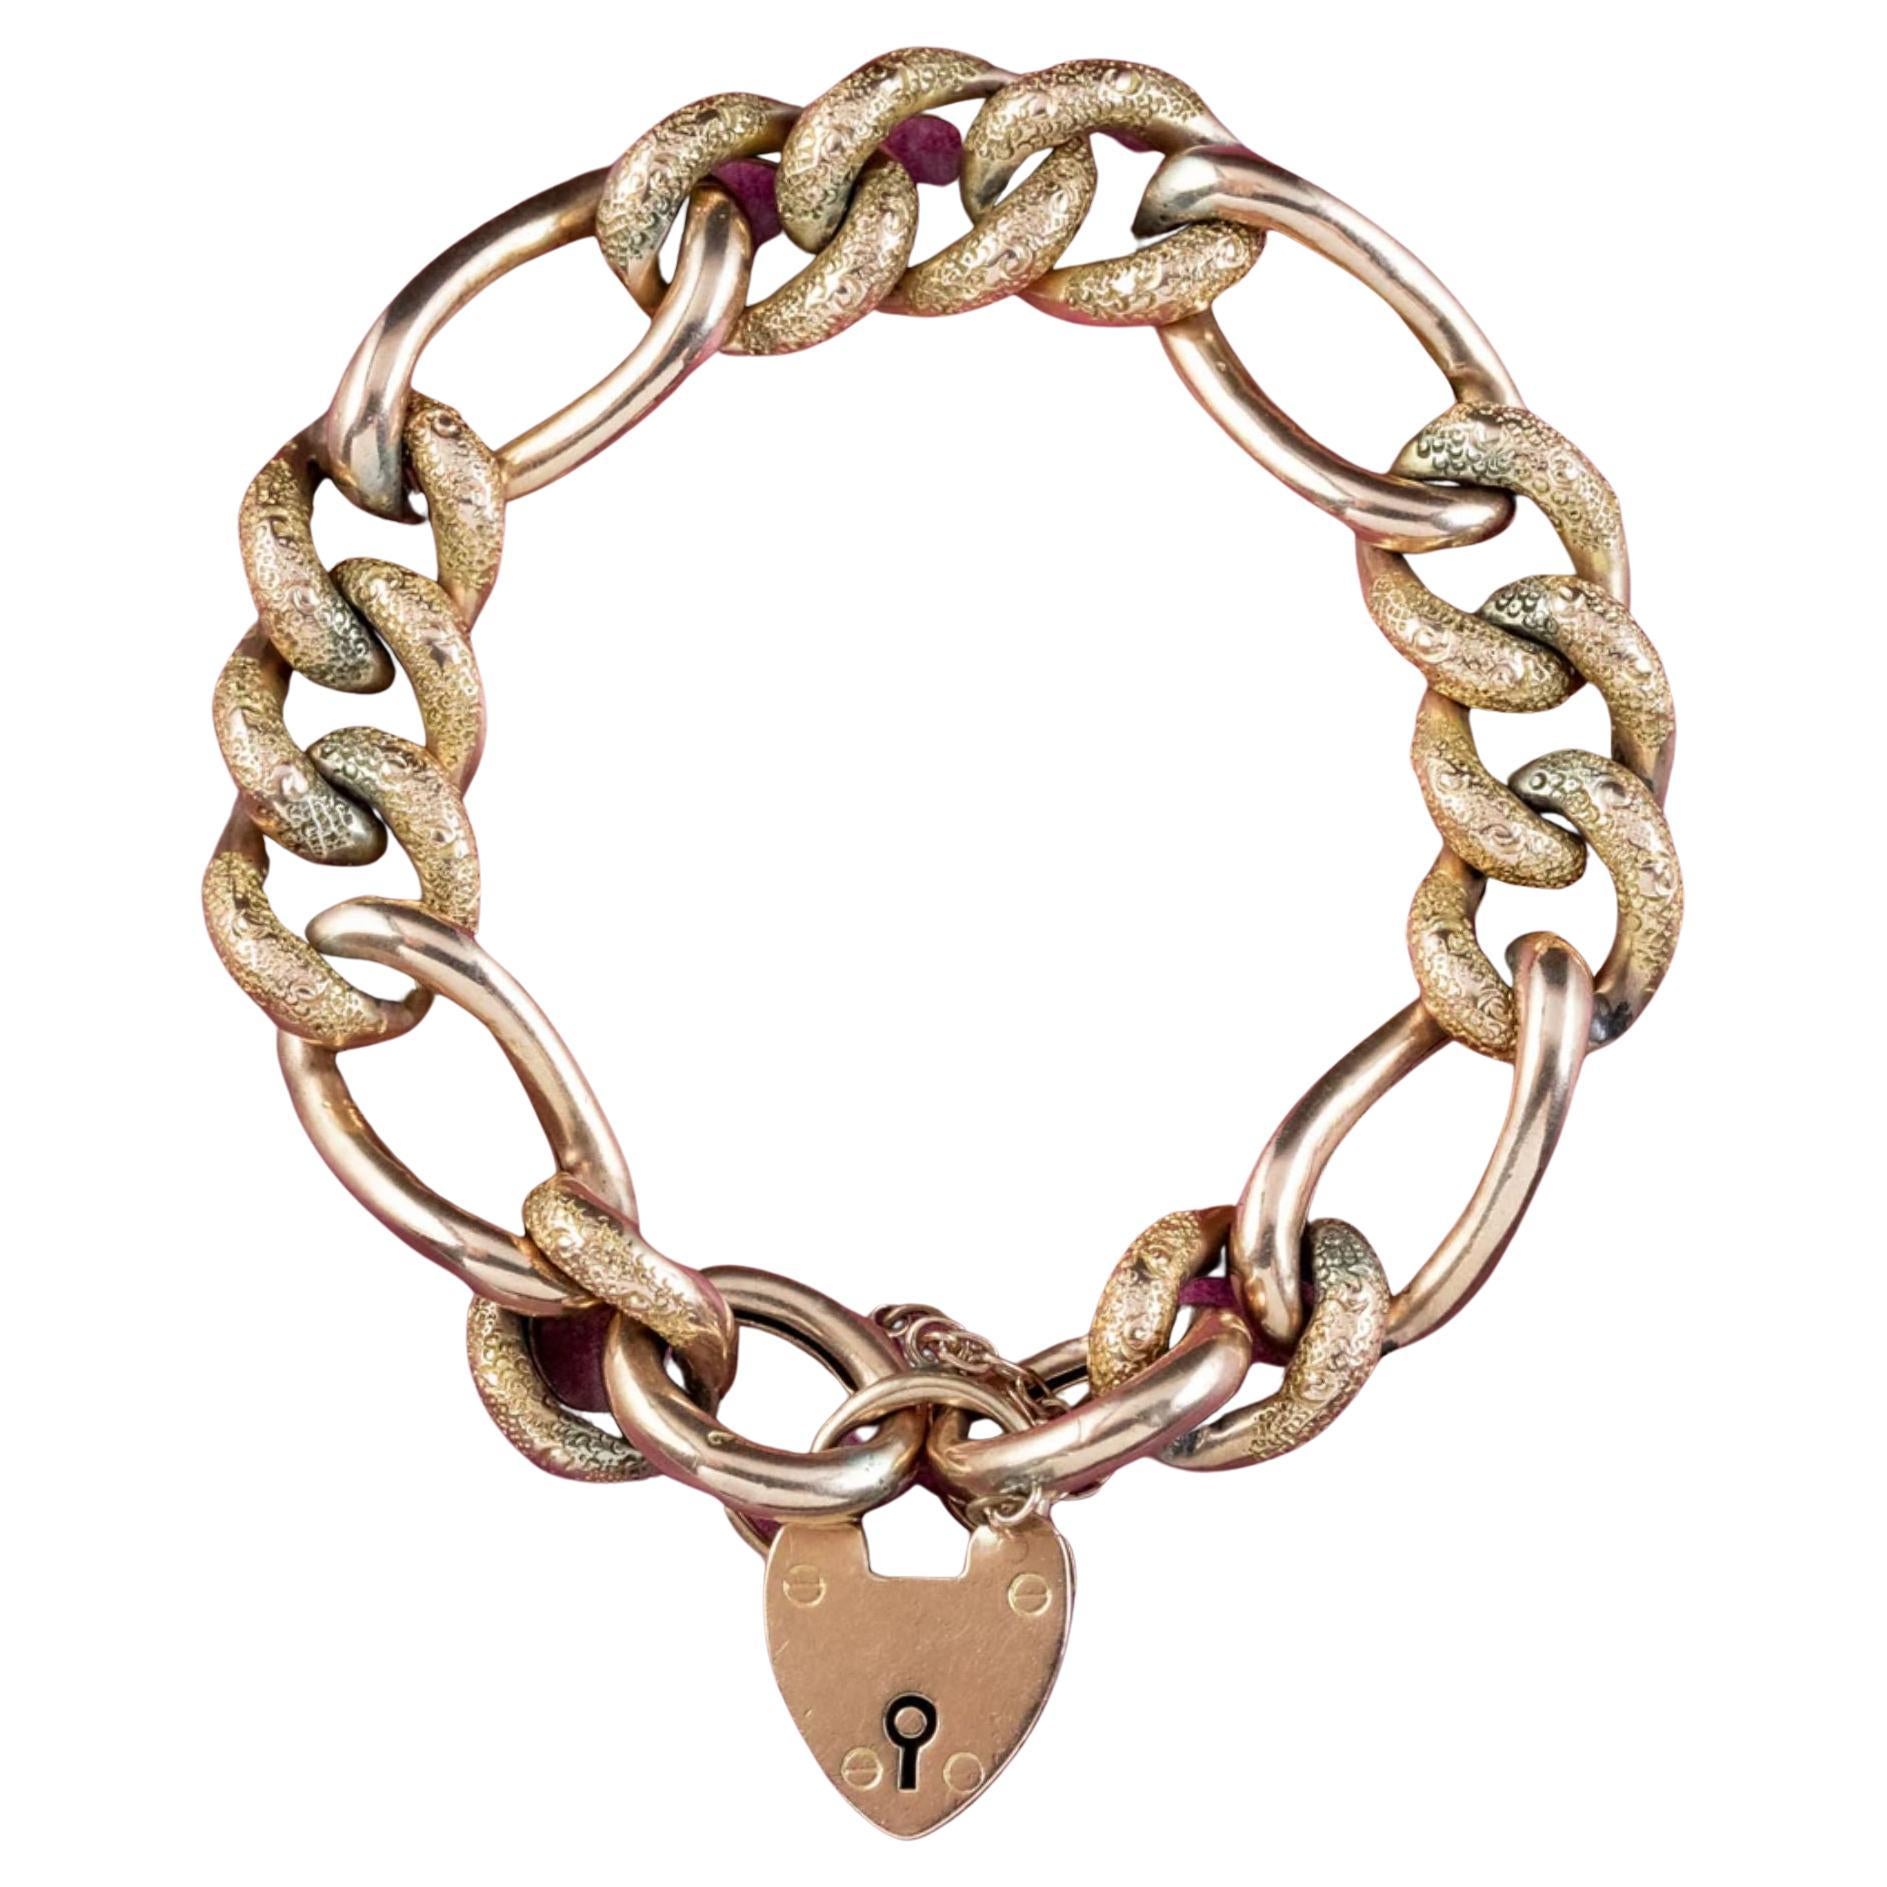 Antique Victorian Chunky Curb Bracelet in 9ct Gold with Heart Padlock